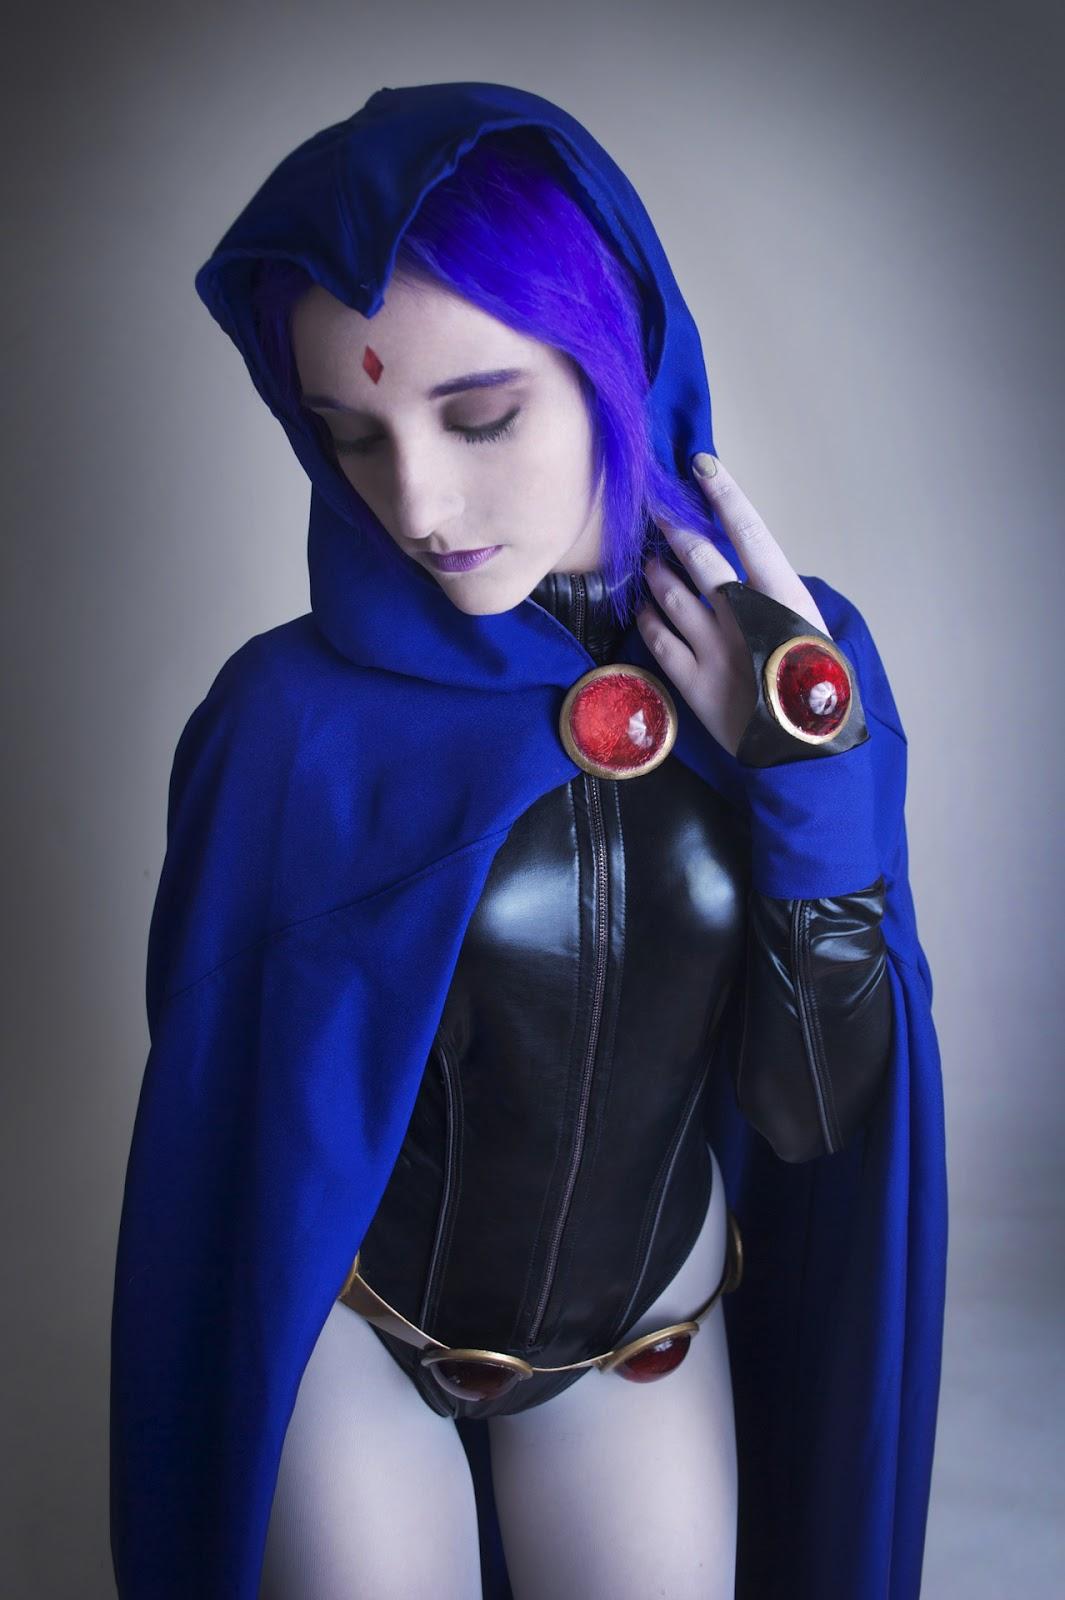 50+ Hot Pictures Of Raven From Teen Titans, DC Comics. 13